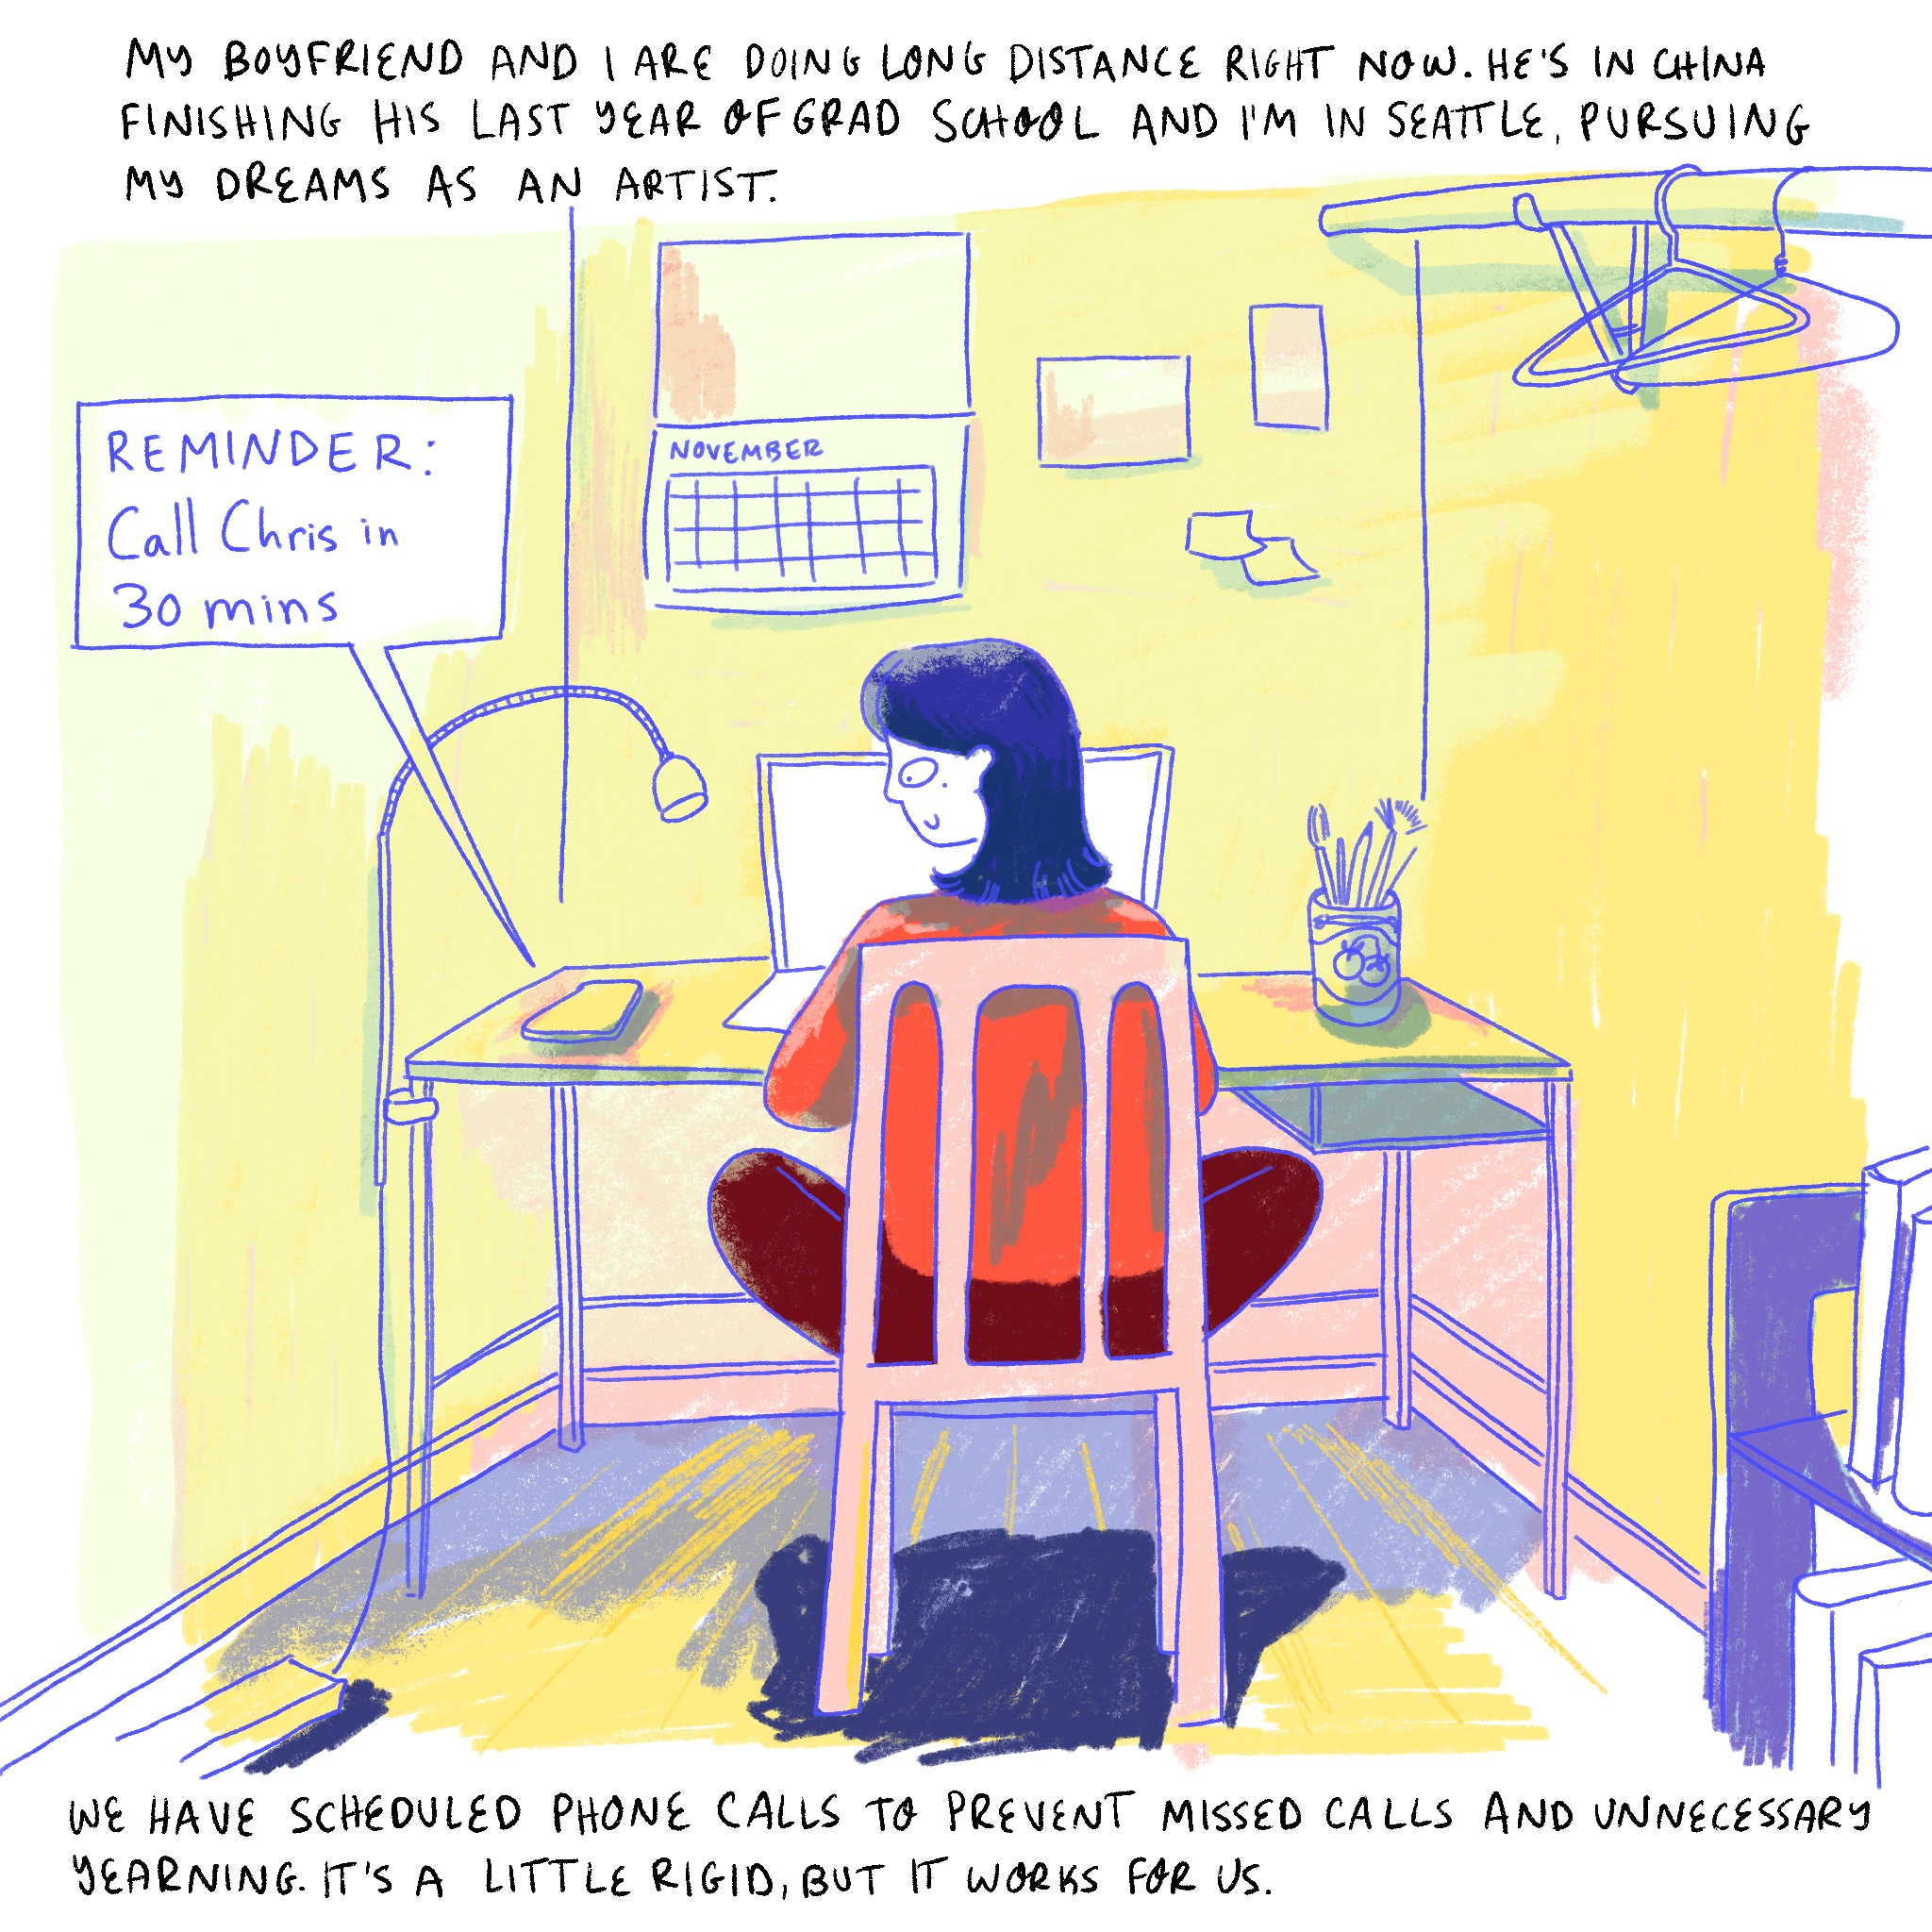 NARRATOR: “My boyfriend and I are doing long distance right now. He’s in China finishing his last year of grad school and I’m in Seattle, pursing my dreams as an artist.”  In the panel, Dabin sits at a desk in front of a computer. A calendar on the wall says November. A cell phone next to Dabin shows a notification reading “Reminder: Call Chris in 30 mins.”  NARRATOR: “We have scheduled phone calls to prevent missed calls and unnecessary yearning. It’s a little rigid, but it works for us.“